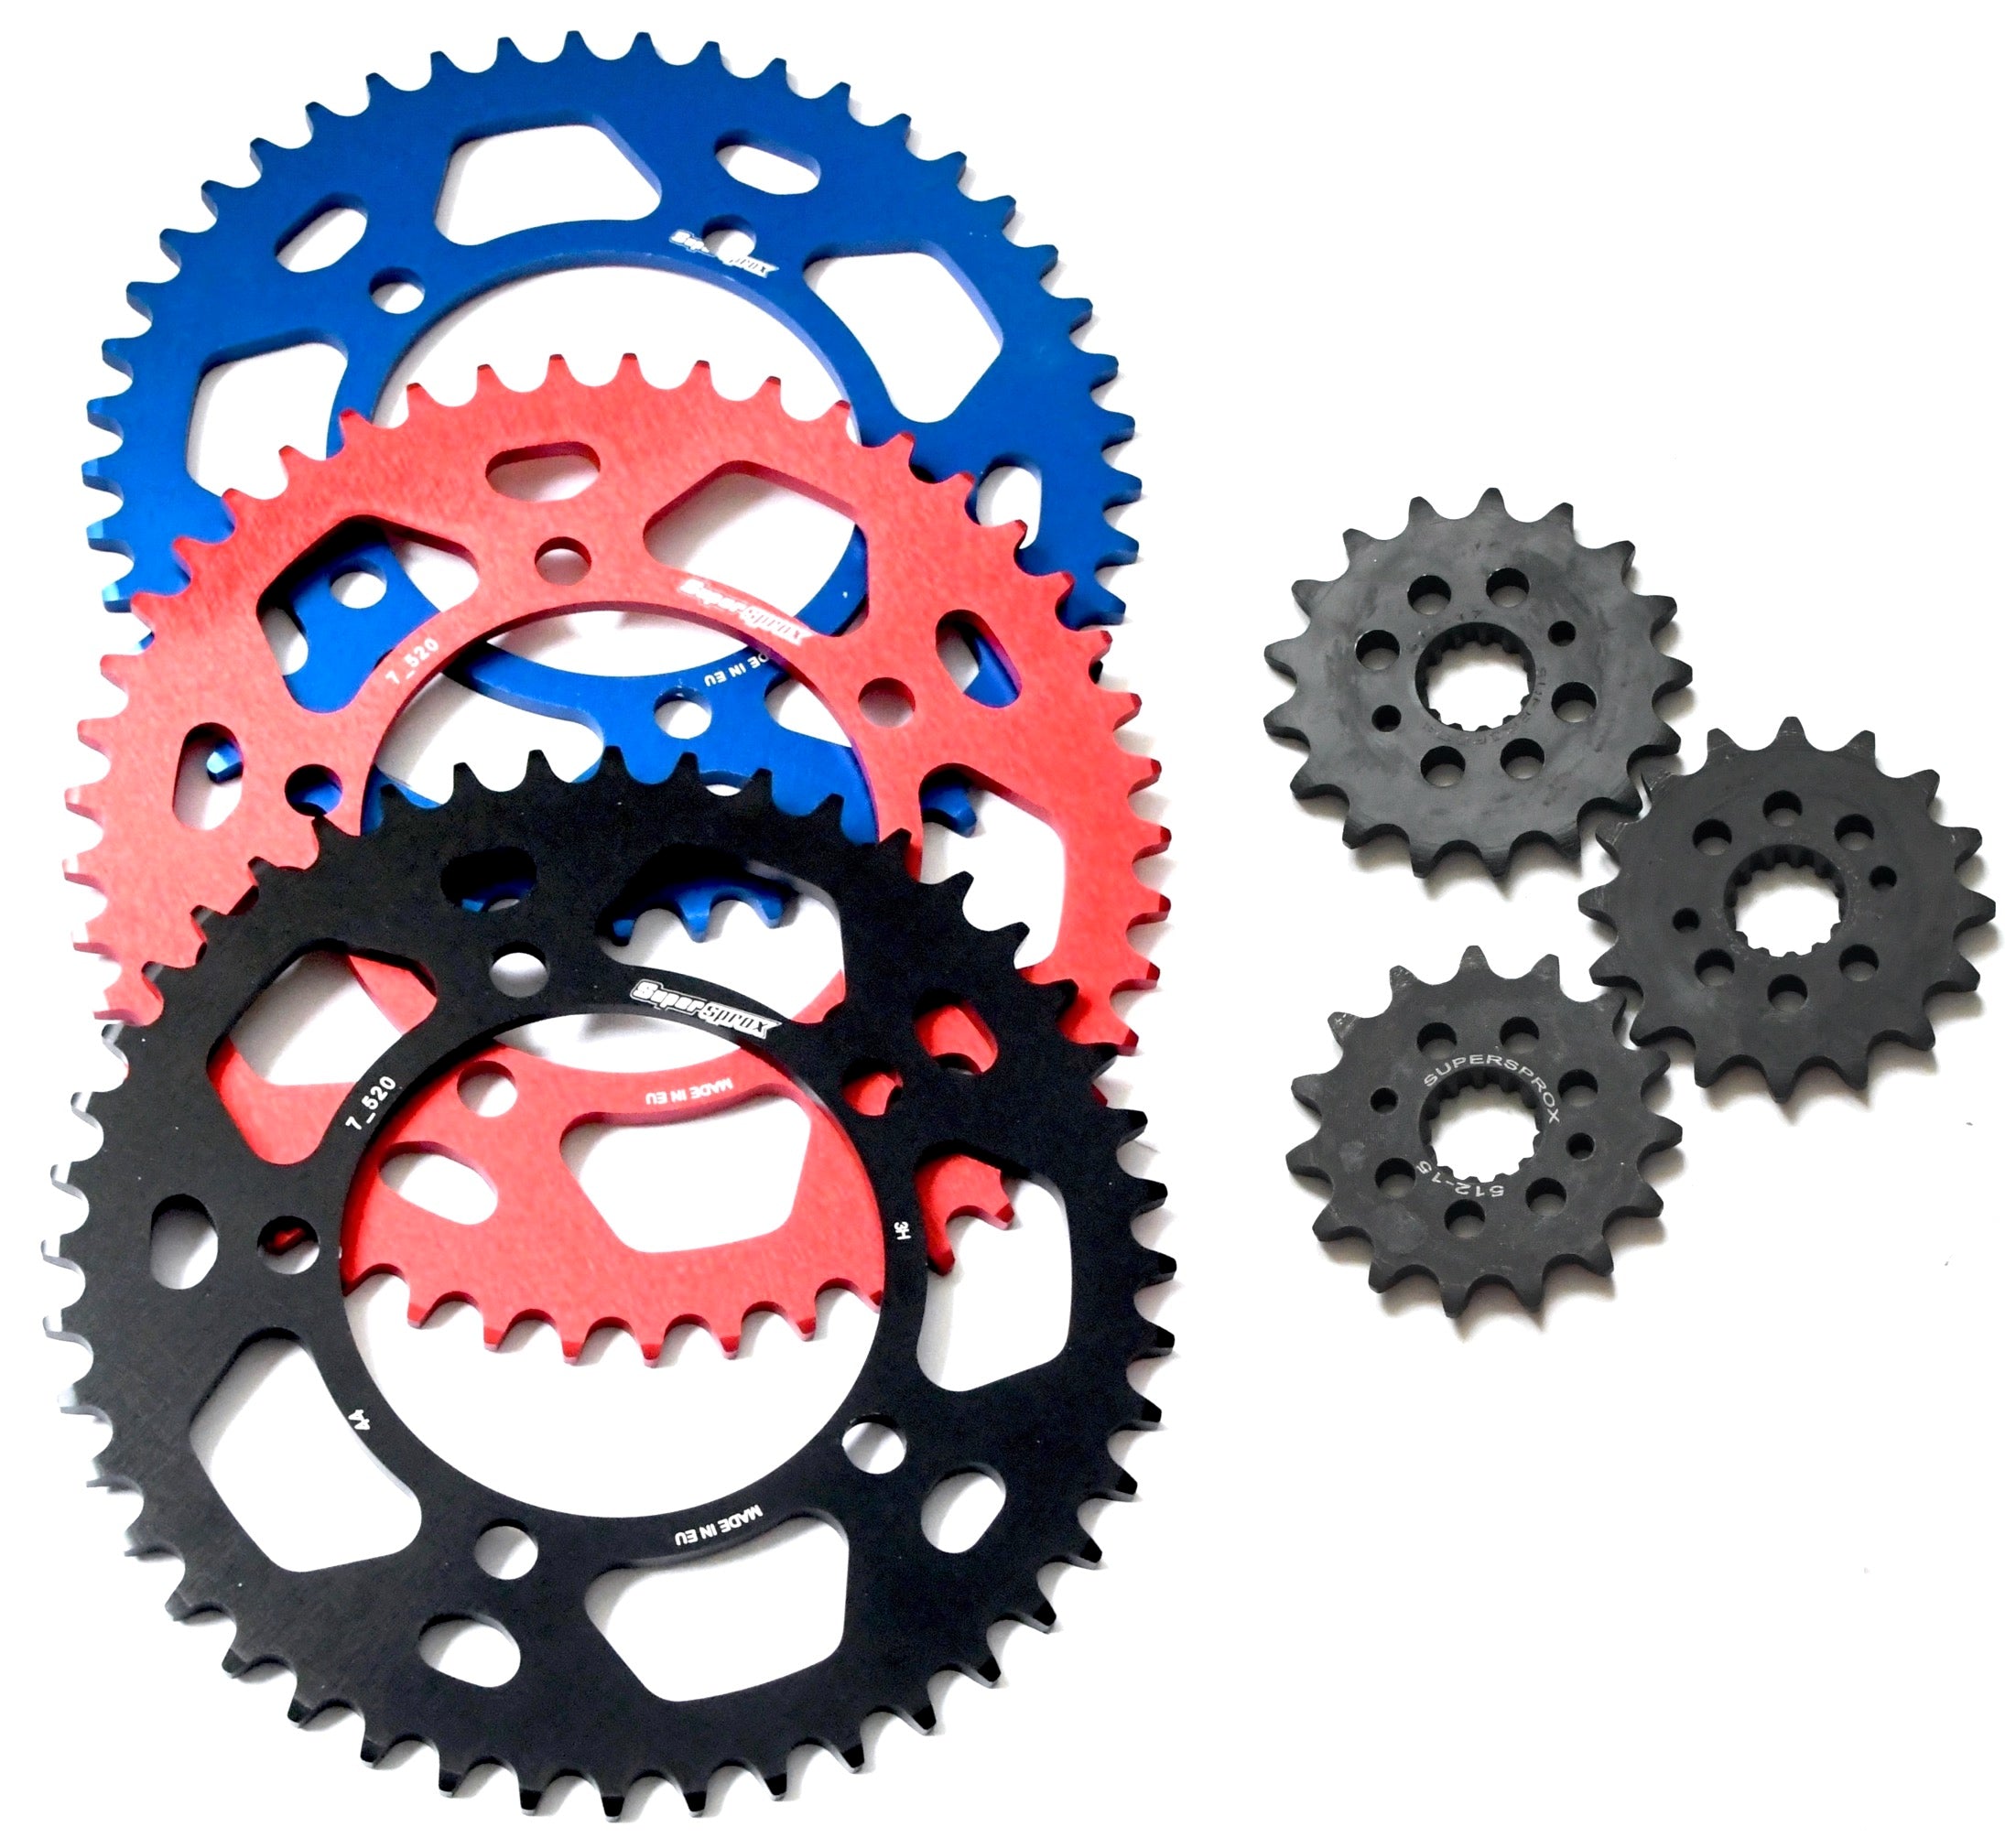 Supersprox 520 Conversion Racing Sprocket Kit for Yamaha YZF-R1 1998-2014 - Choose Your Sprockets